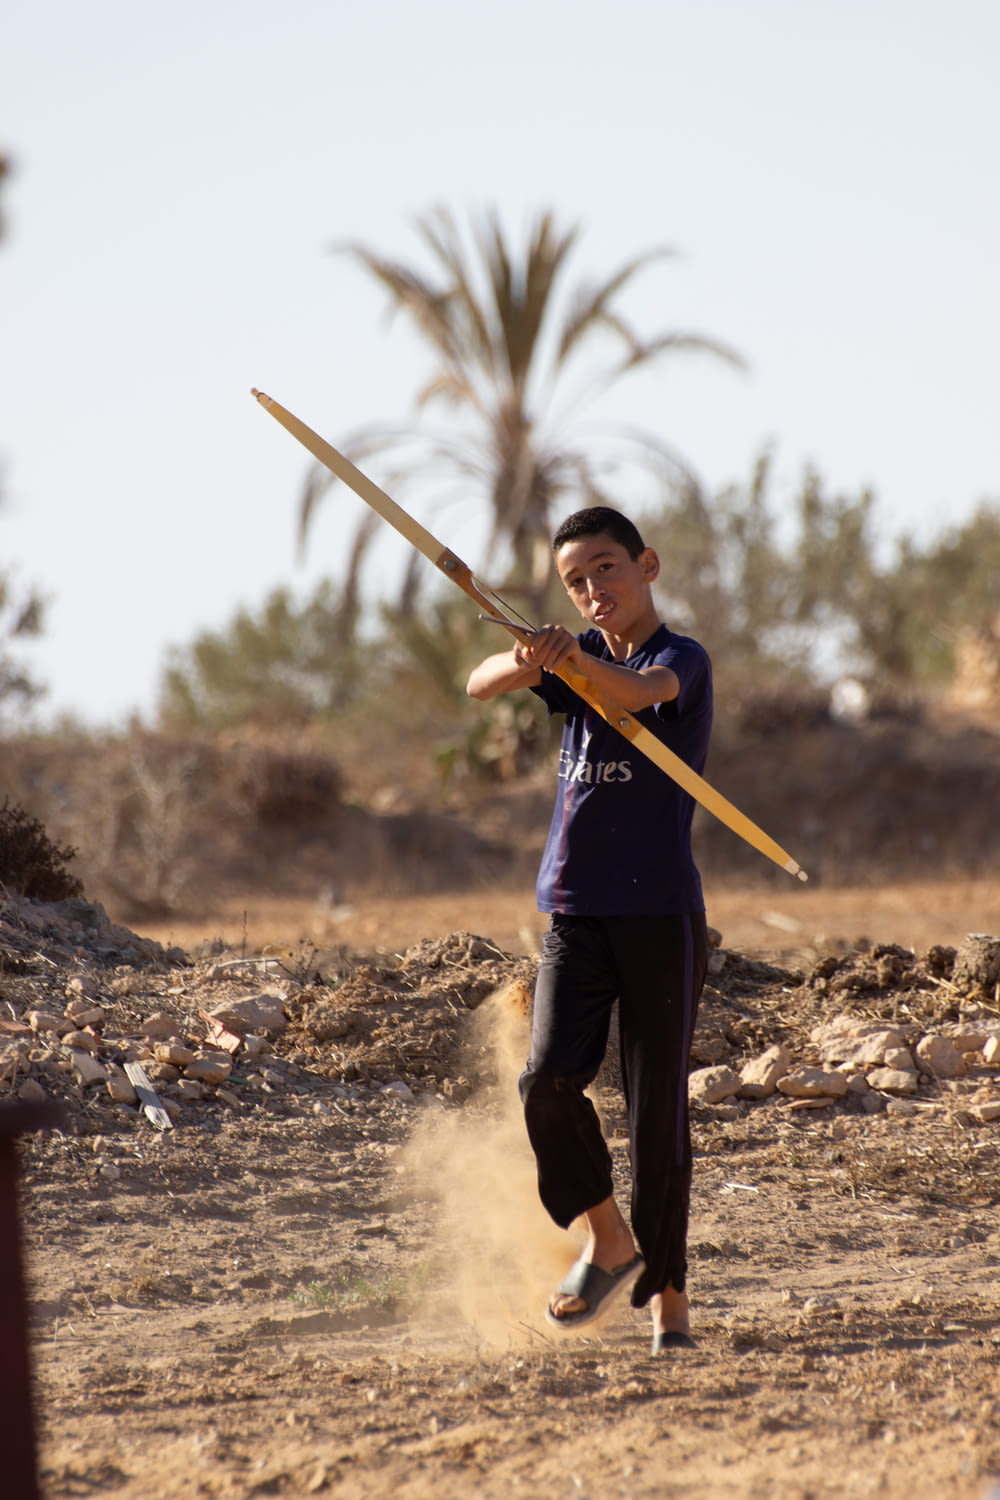 a man holding a large wooden stick on top of a dirt field